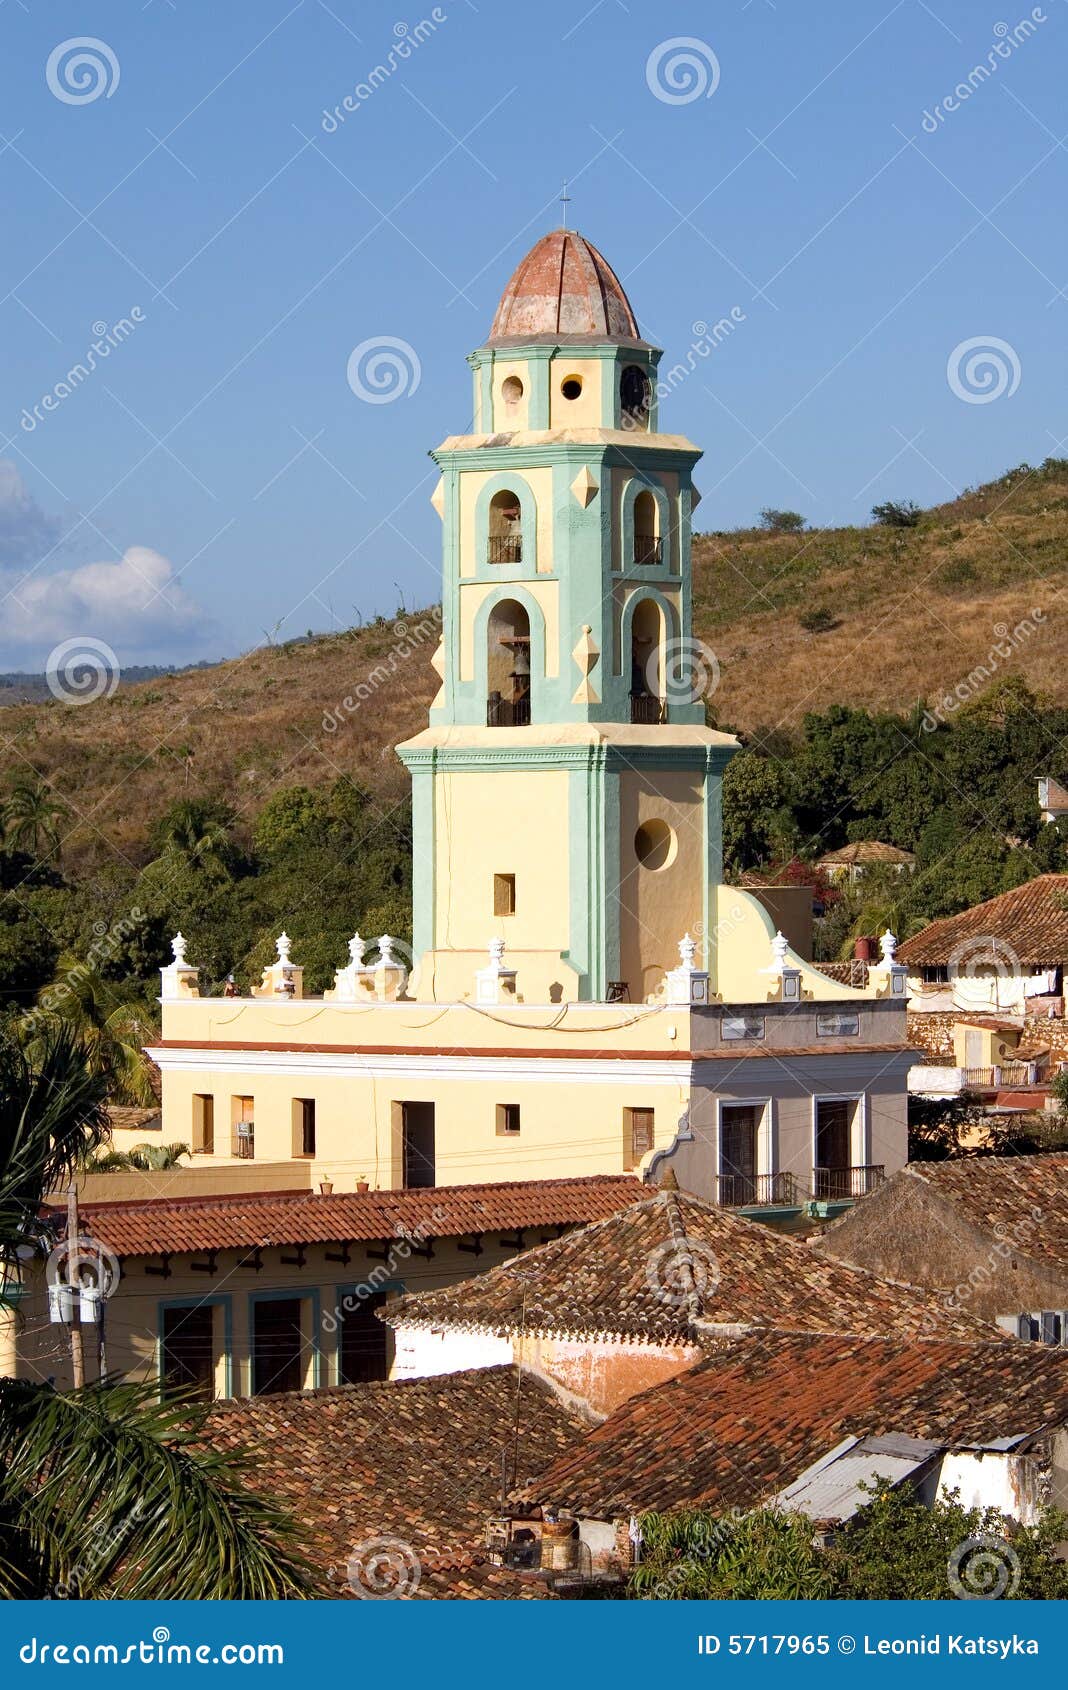 belltower in the old town trinidad, cuba